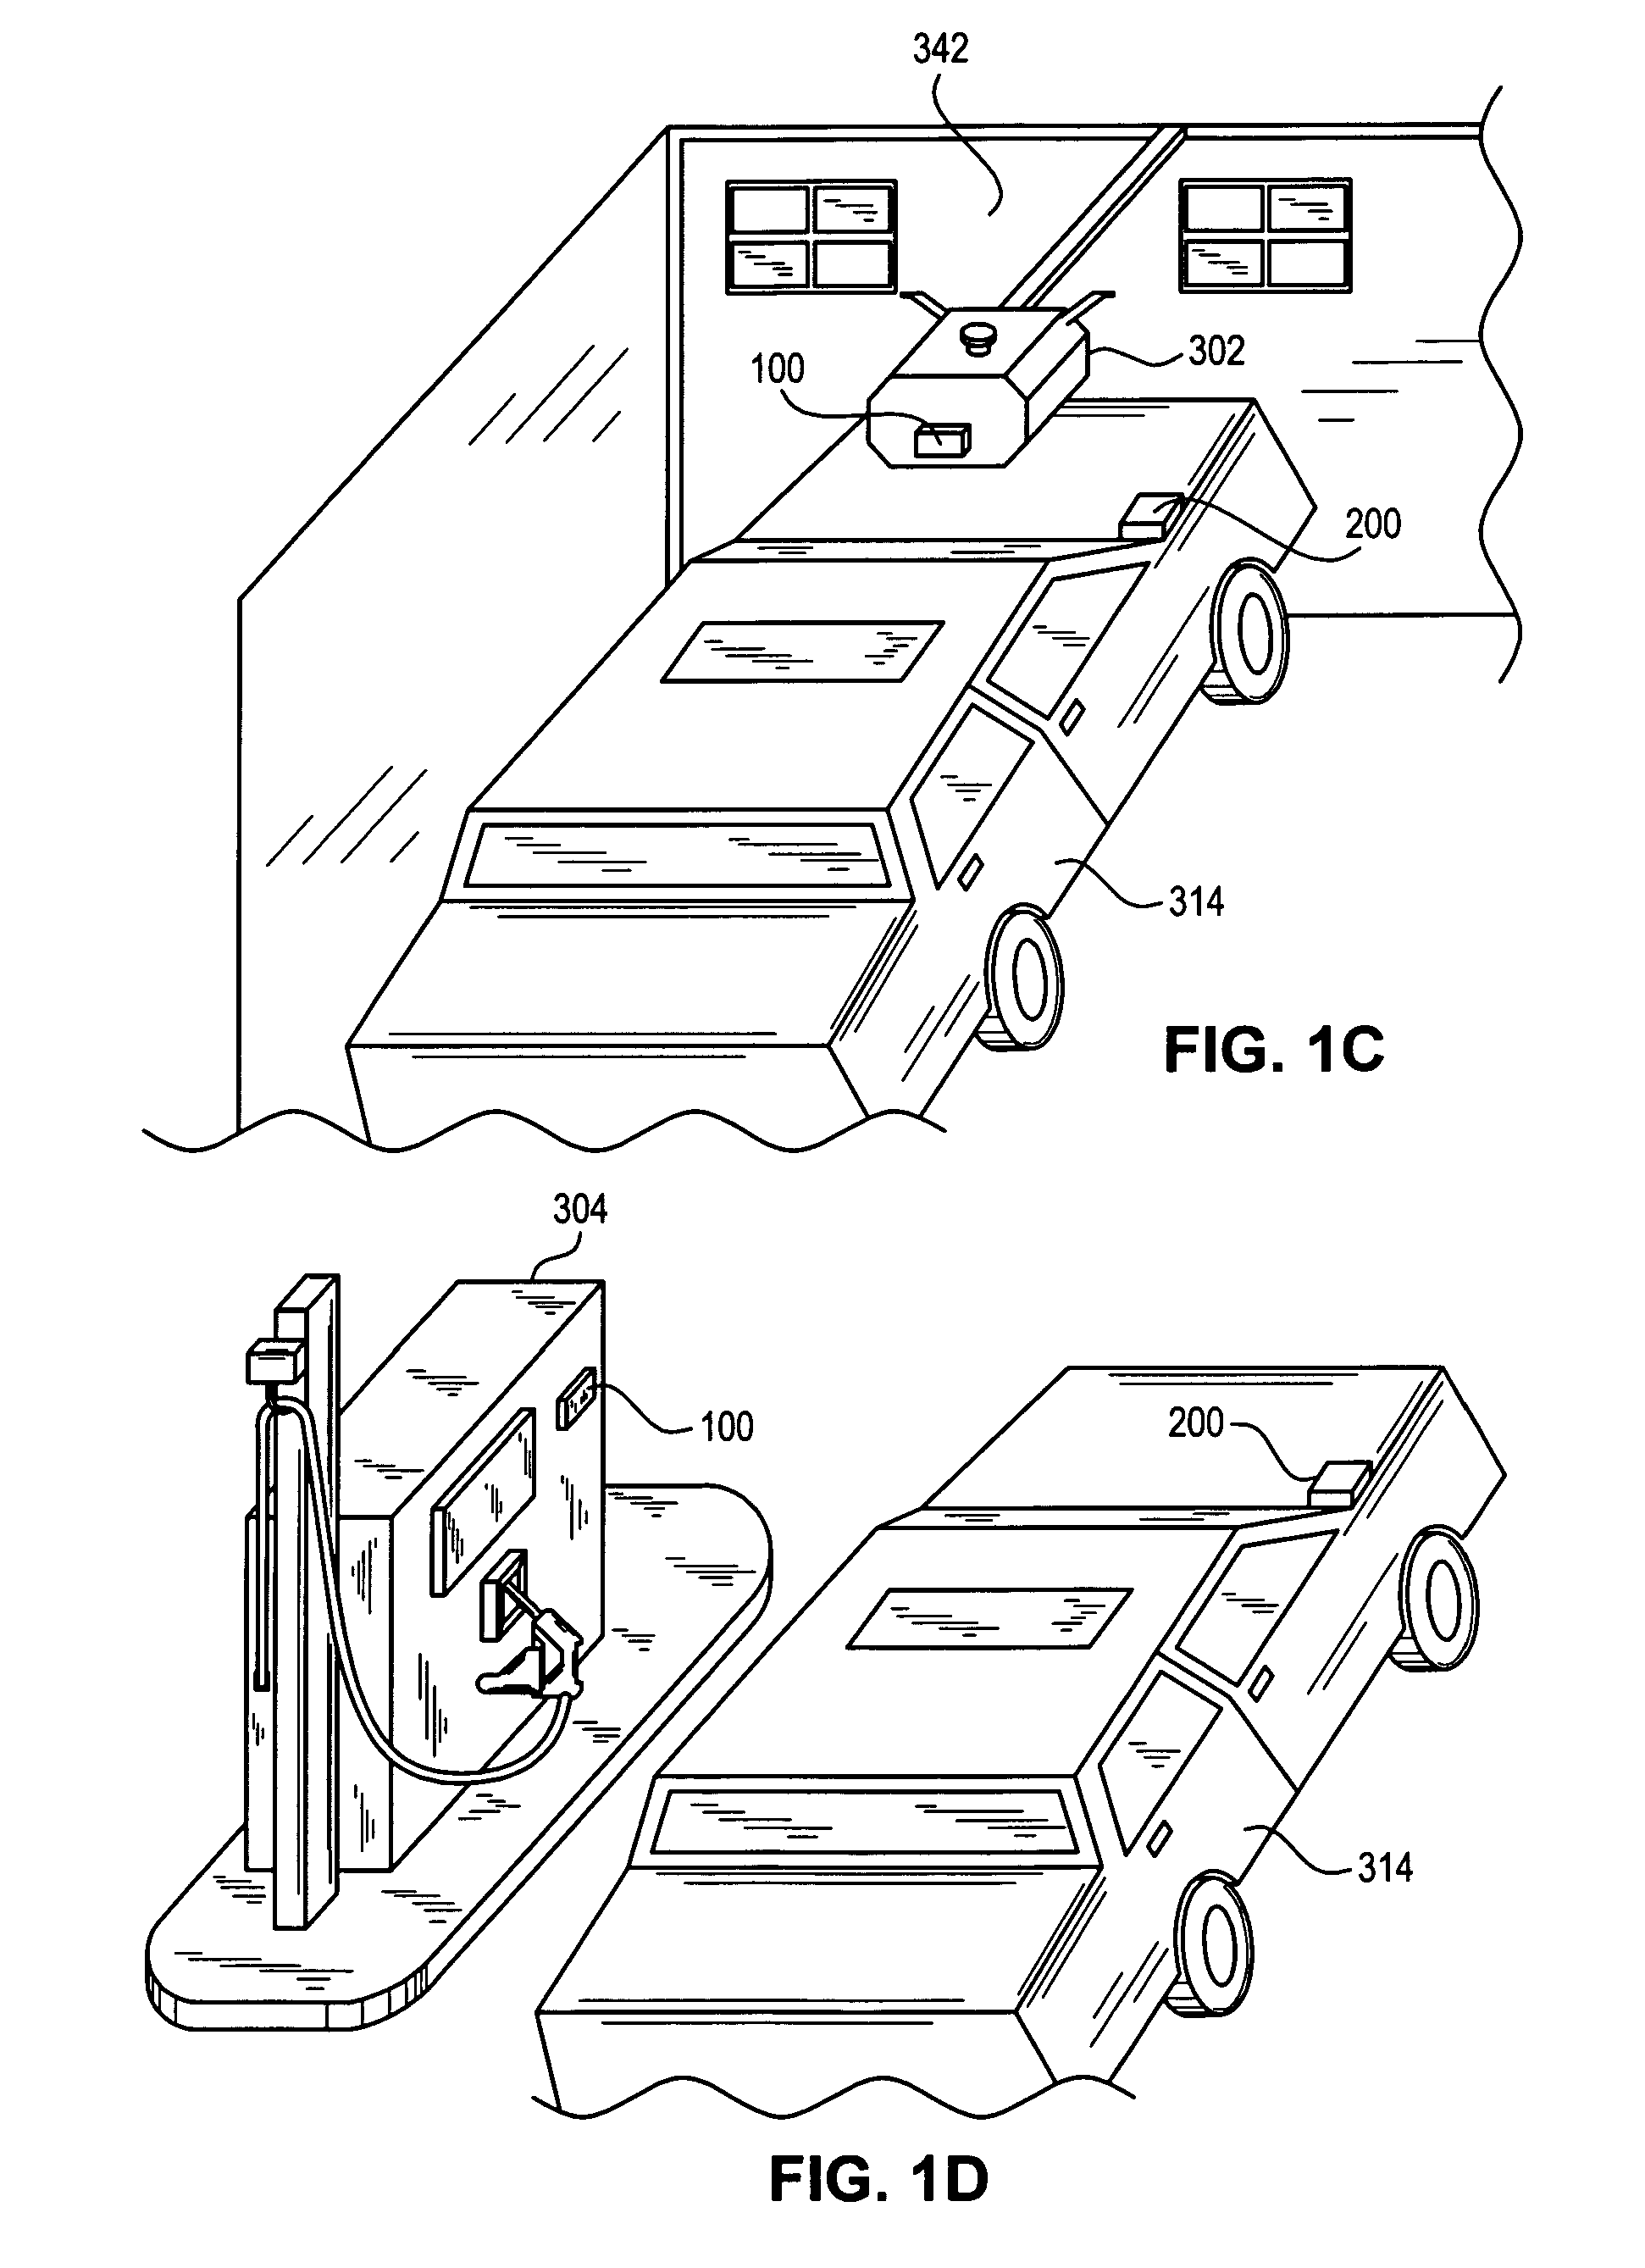 System for interfacing with an on-board engine control system in a vehicle